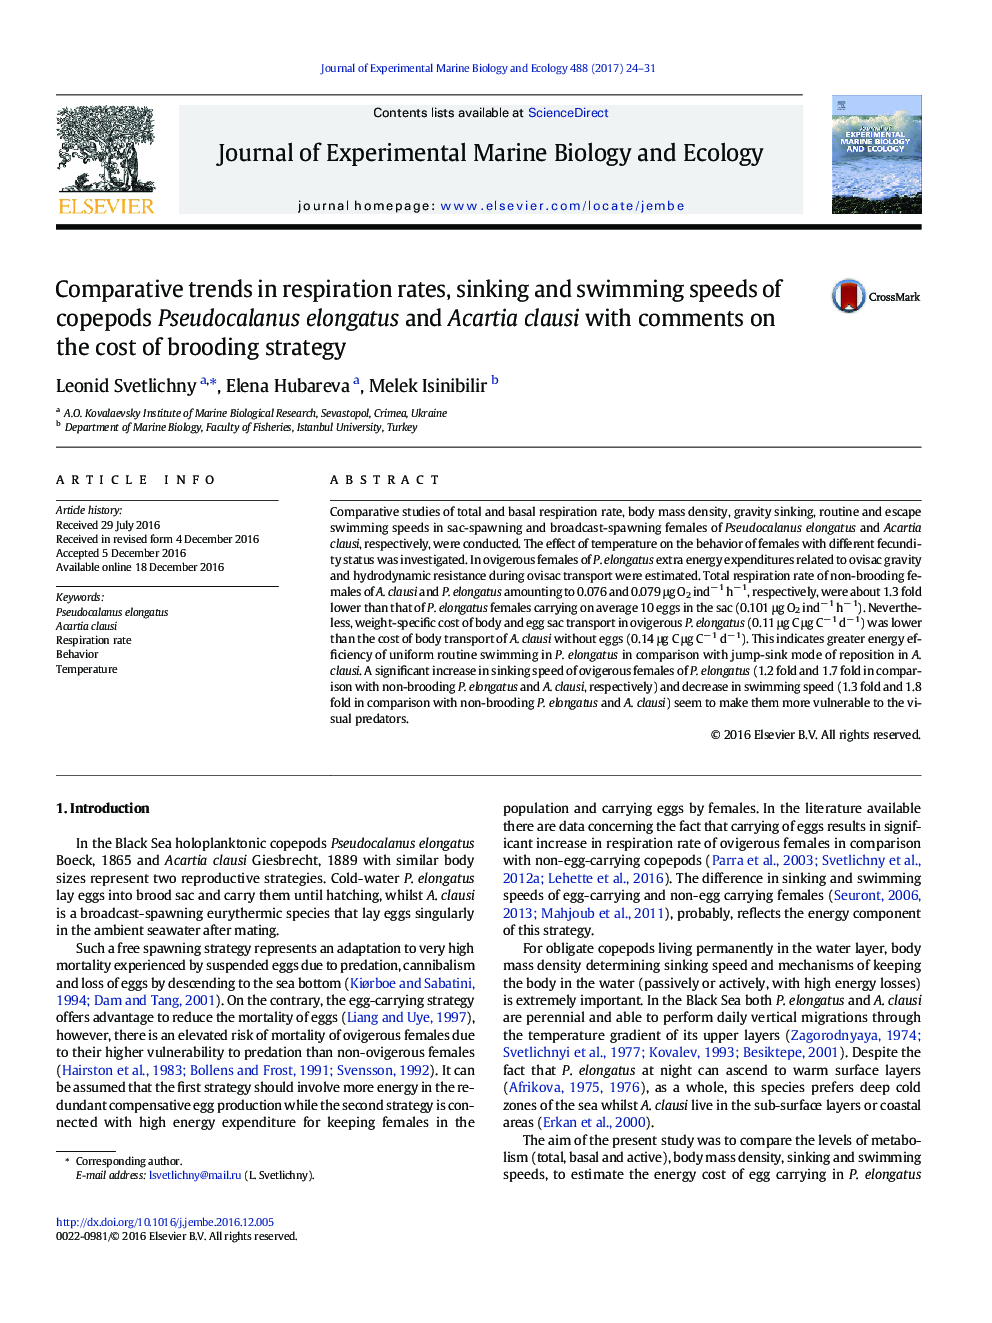 Comparative trends in respiration rates, sinking and swimming speeds of copepods Pseudocalanus elongatus and Acartia clausi with comments on the cost of brooding strategy